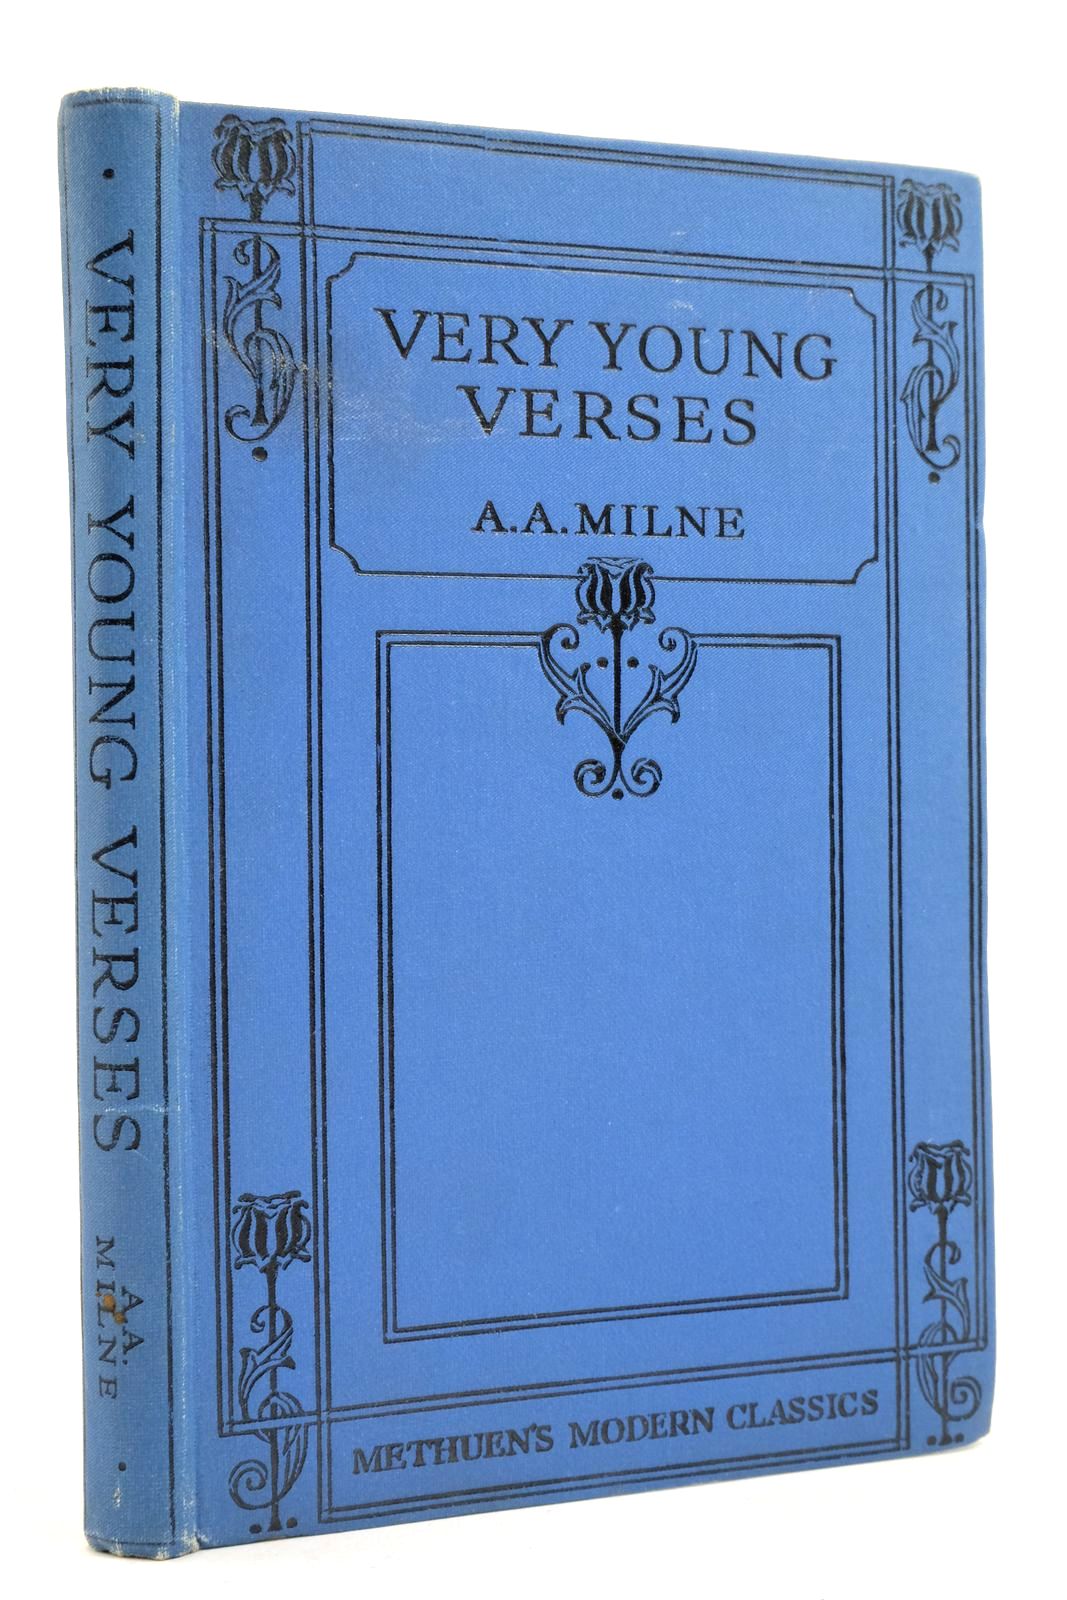 Photo of VERY YOUNG VERSES written by Milne, A.A. illustrated by Shepard, E.H. published by Methuen &amp; Co. Ltd. (STOCK CODE: 2138760)  for sale by Stella & Rose's Books